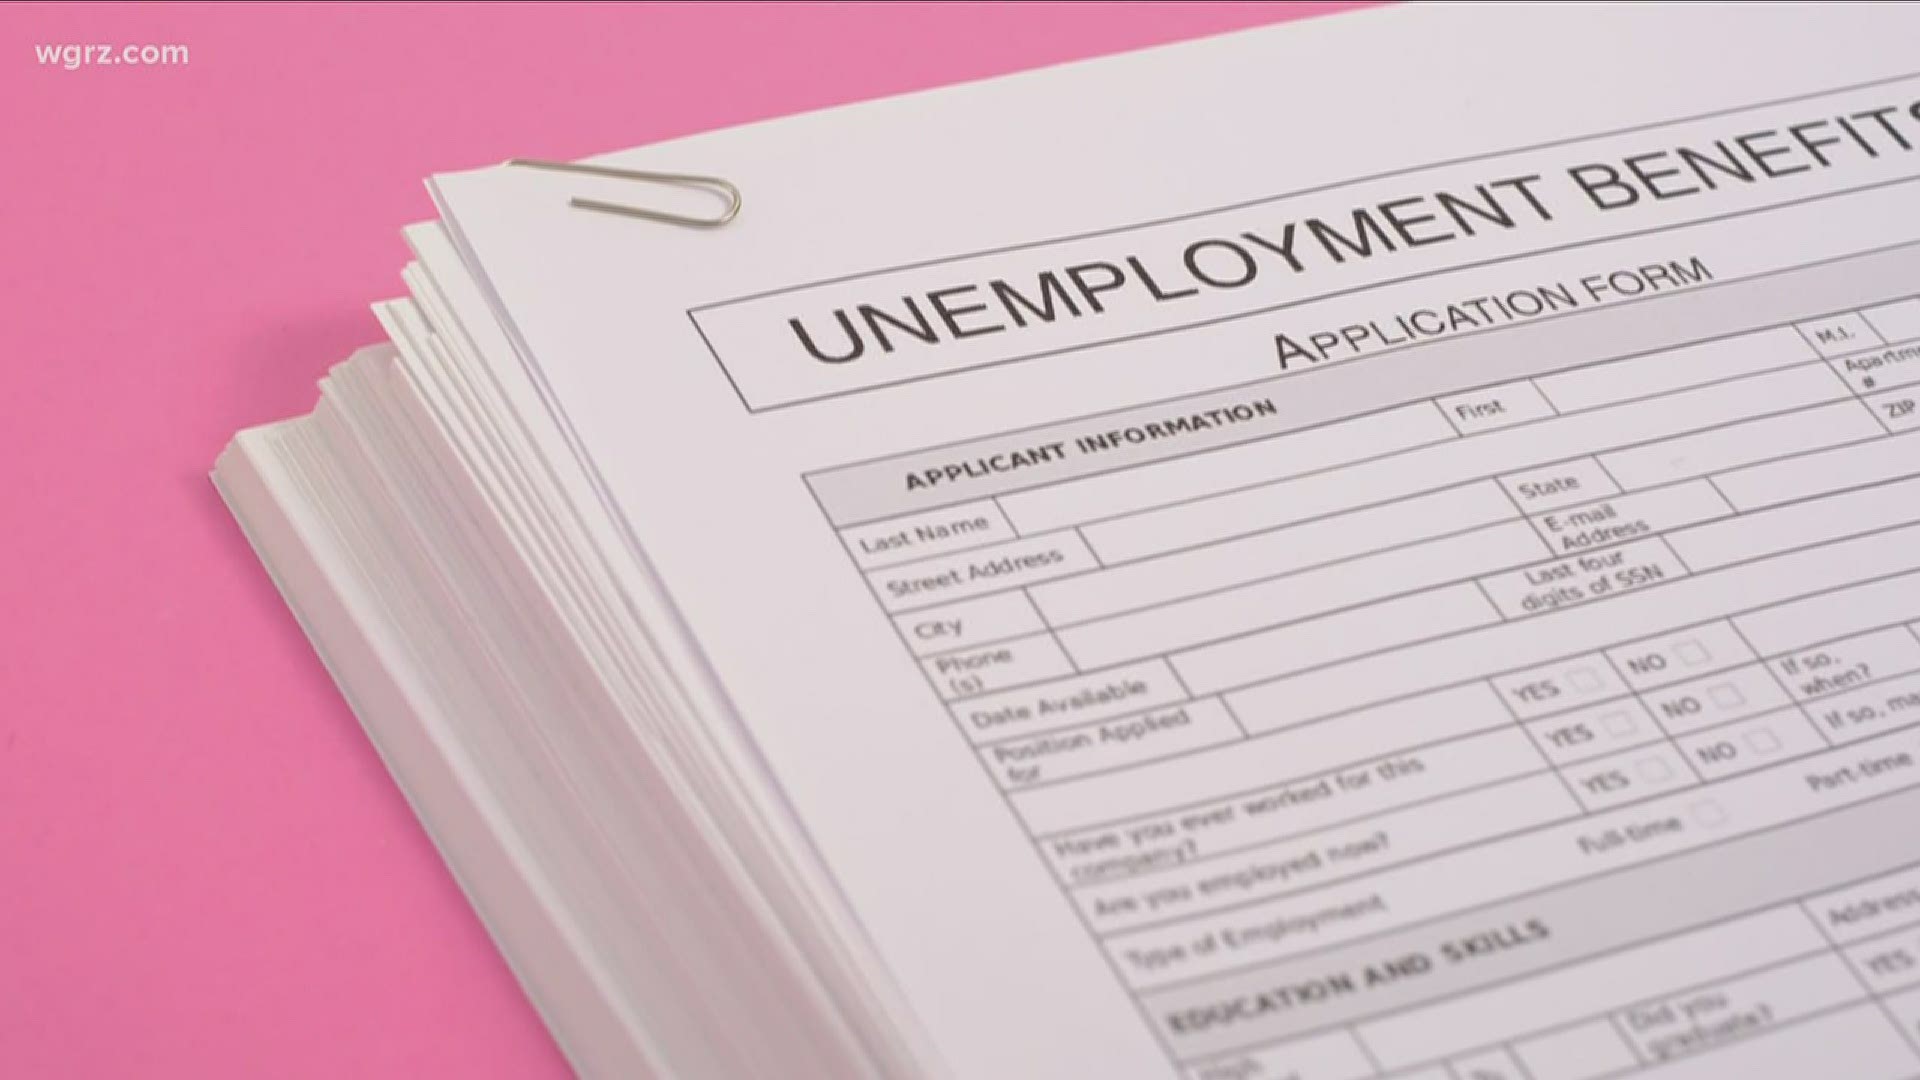 NY state is extending unemployment benefits